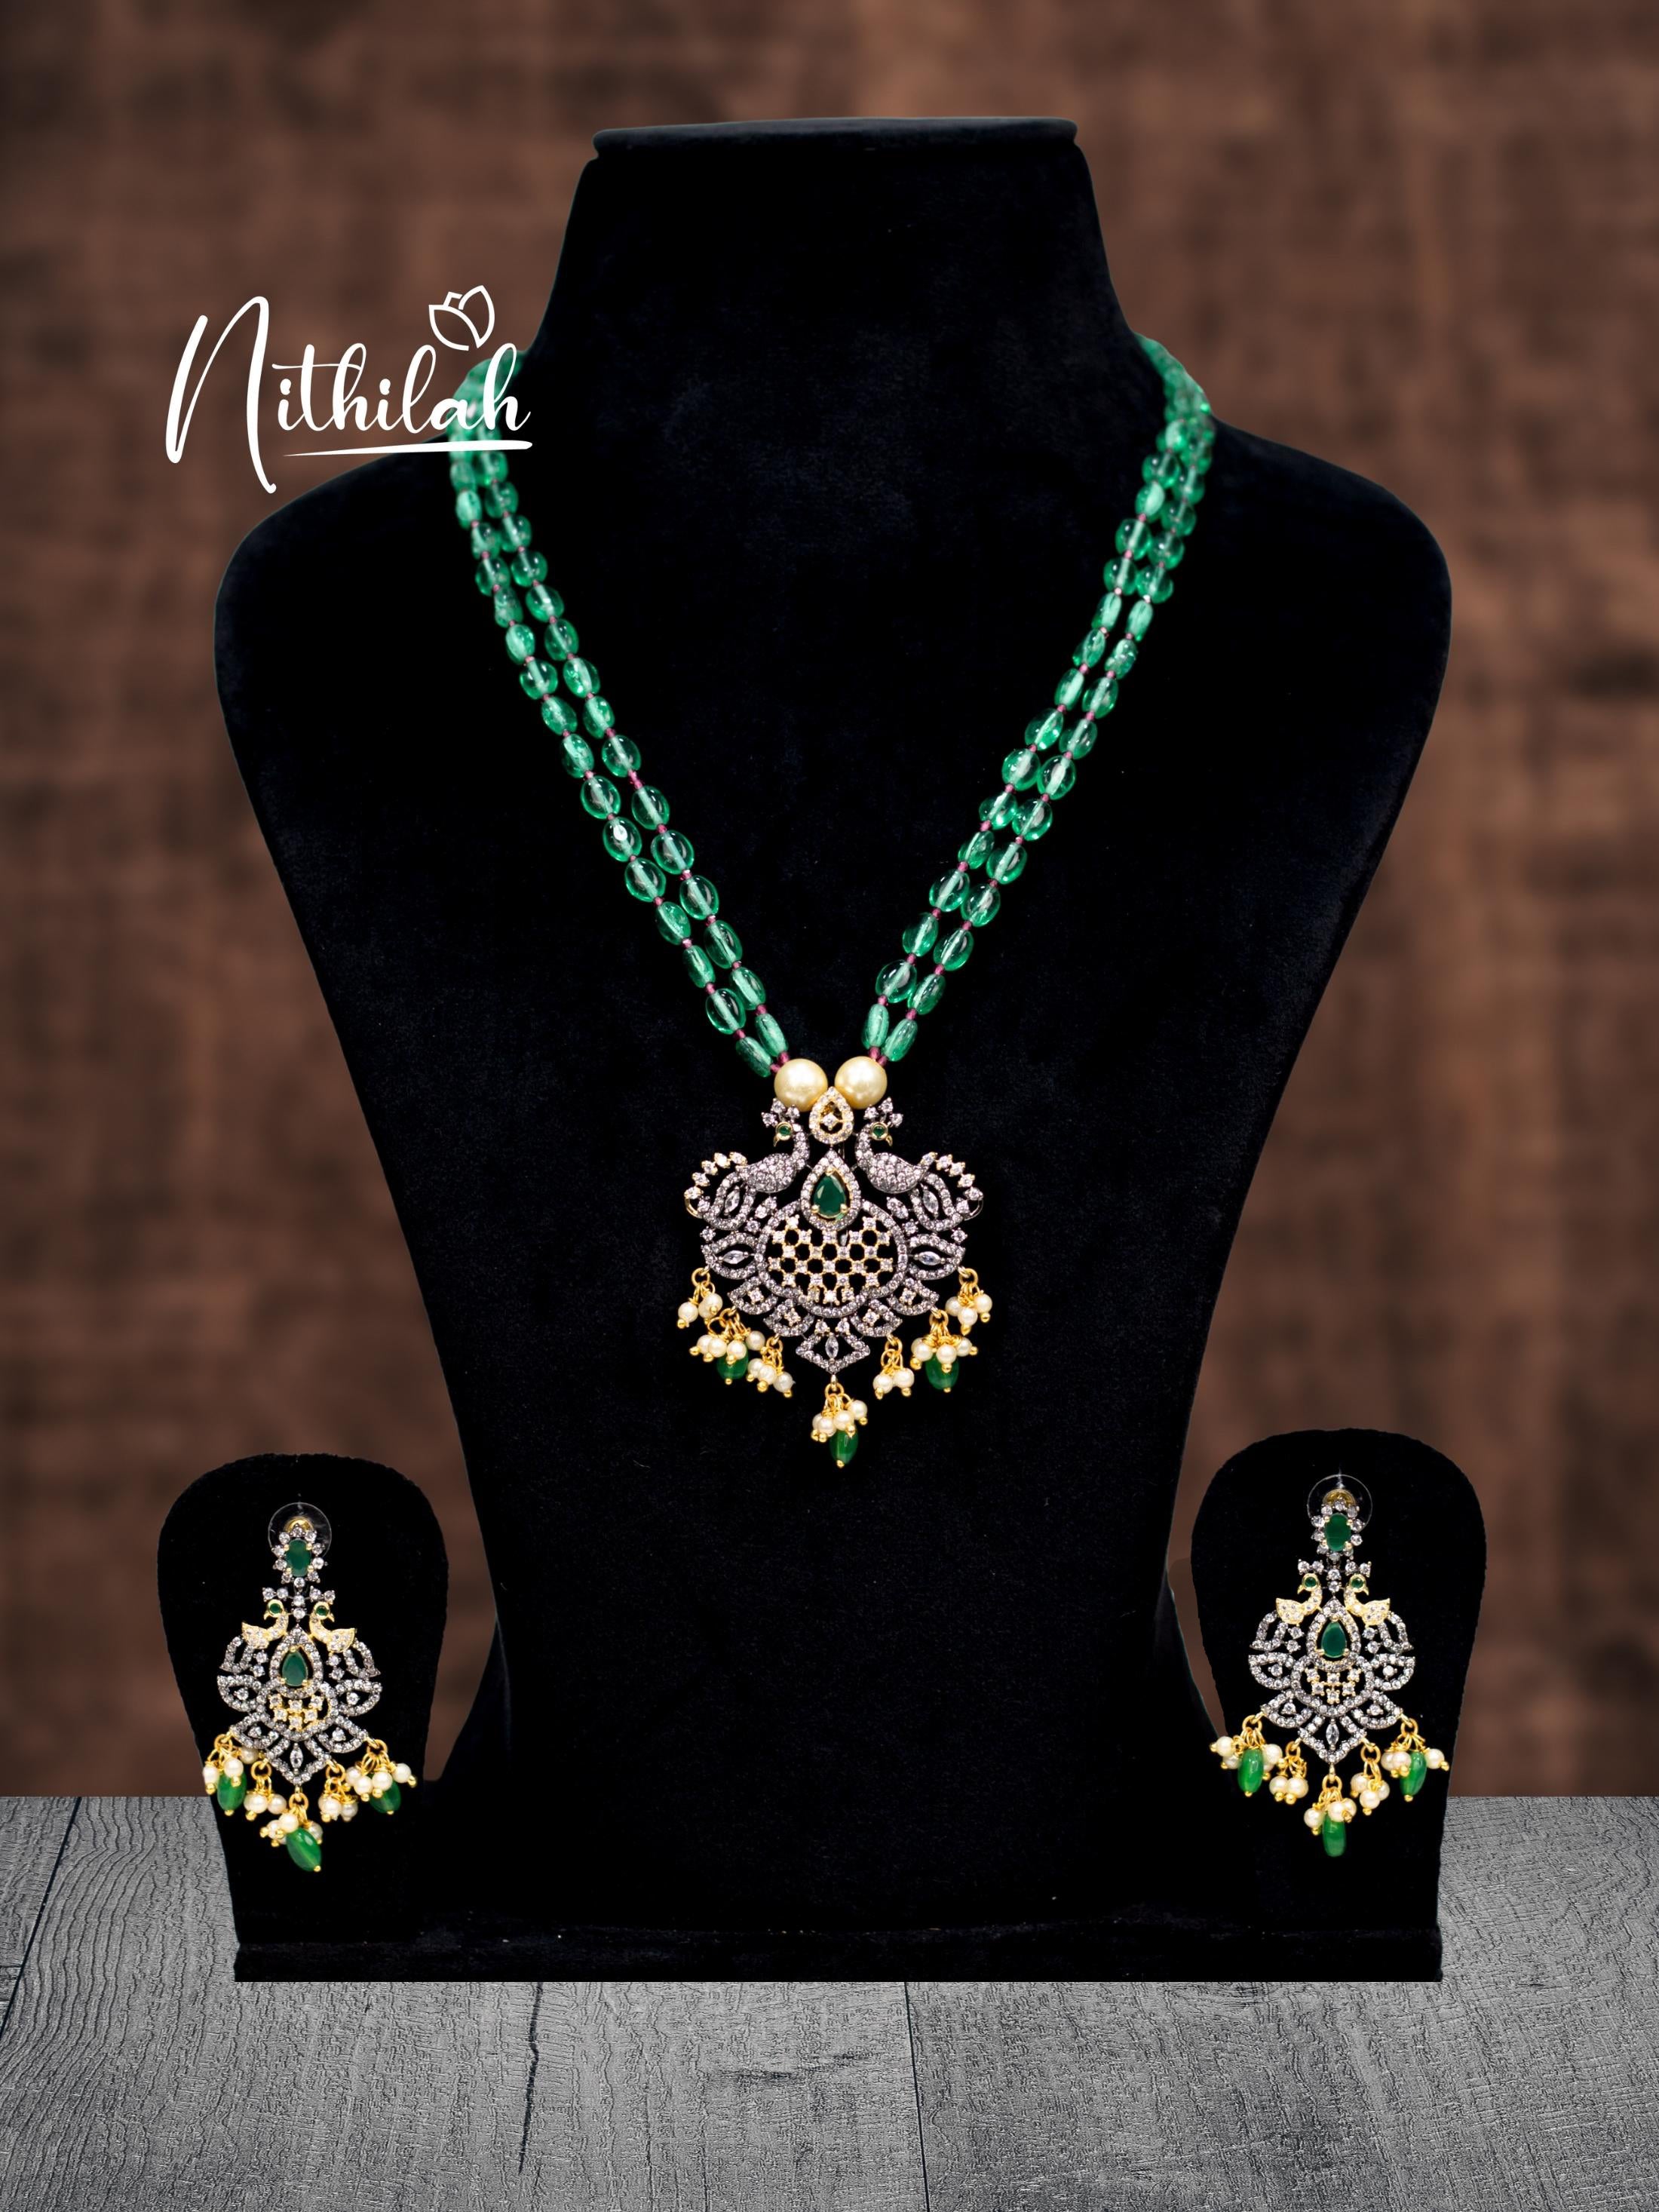 Buy Imitation Jewellery Green Mosanite Beads Victorian Necklace 1 NCPN110 Online